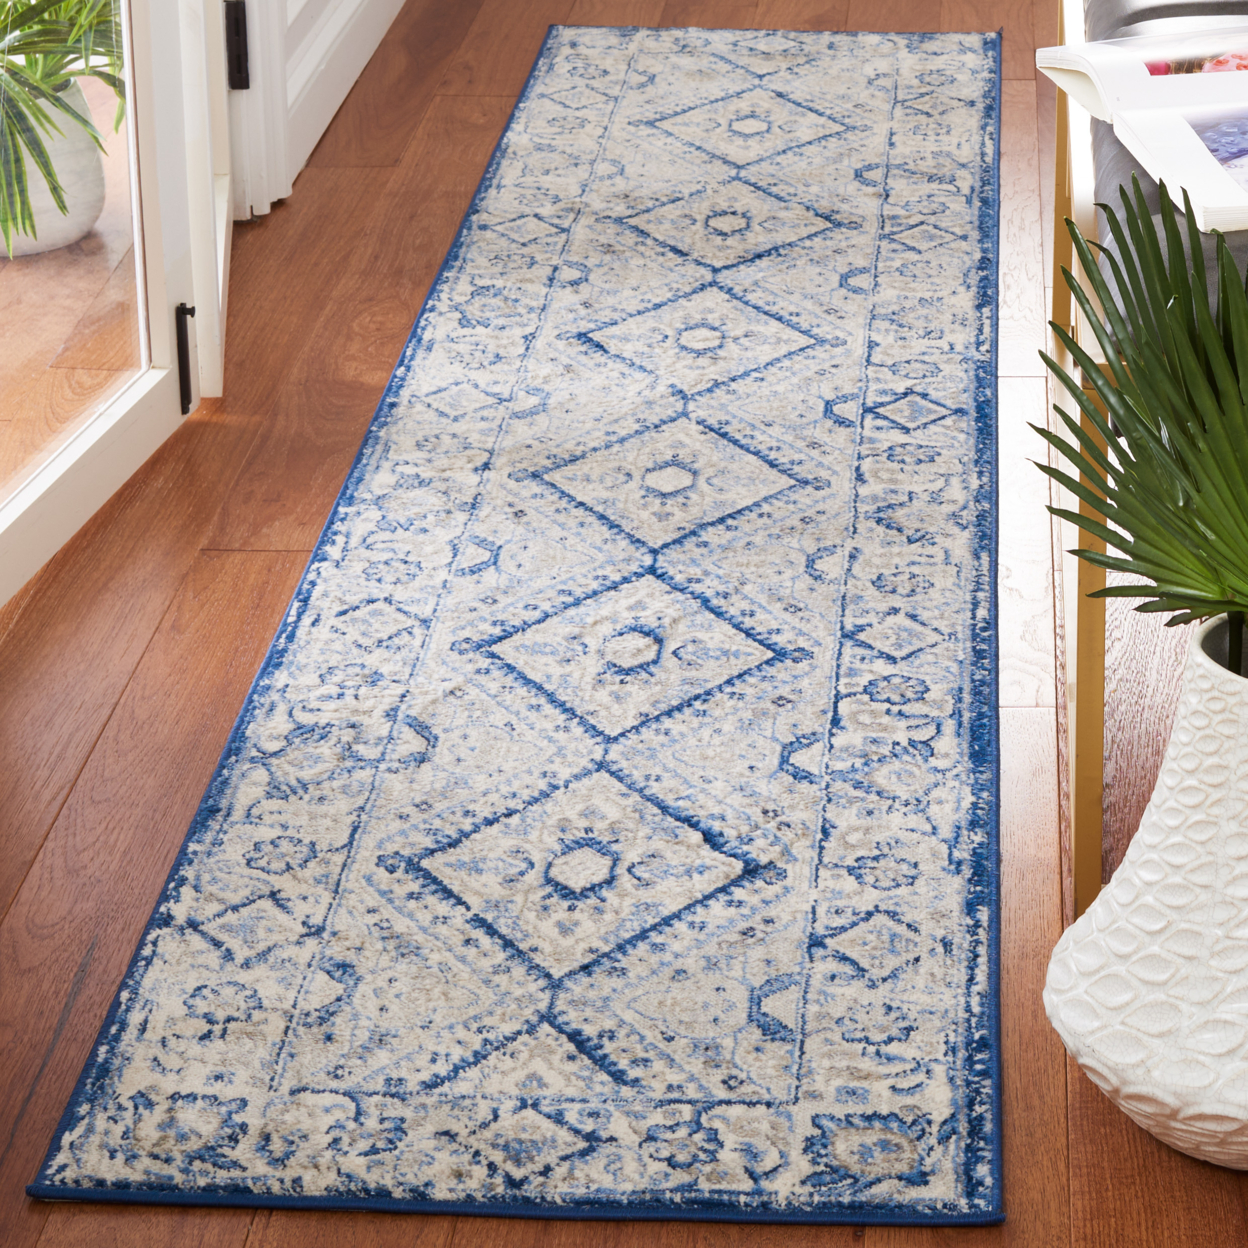 SAFAVIEH Brentwood Collection BNT876M Blue / Ivory Rug - 2' X 9'